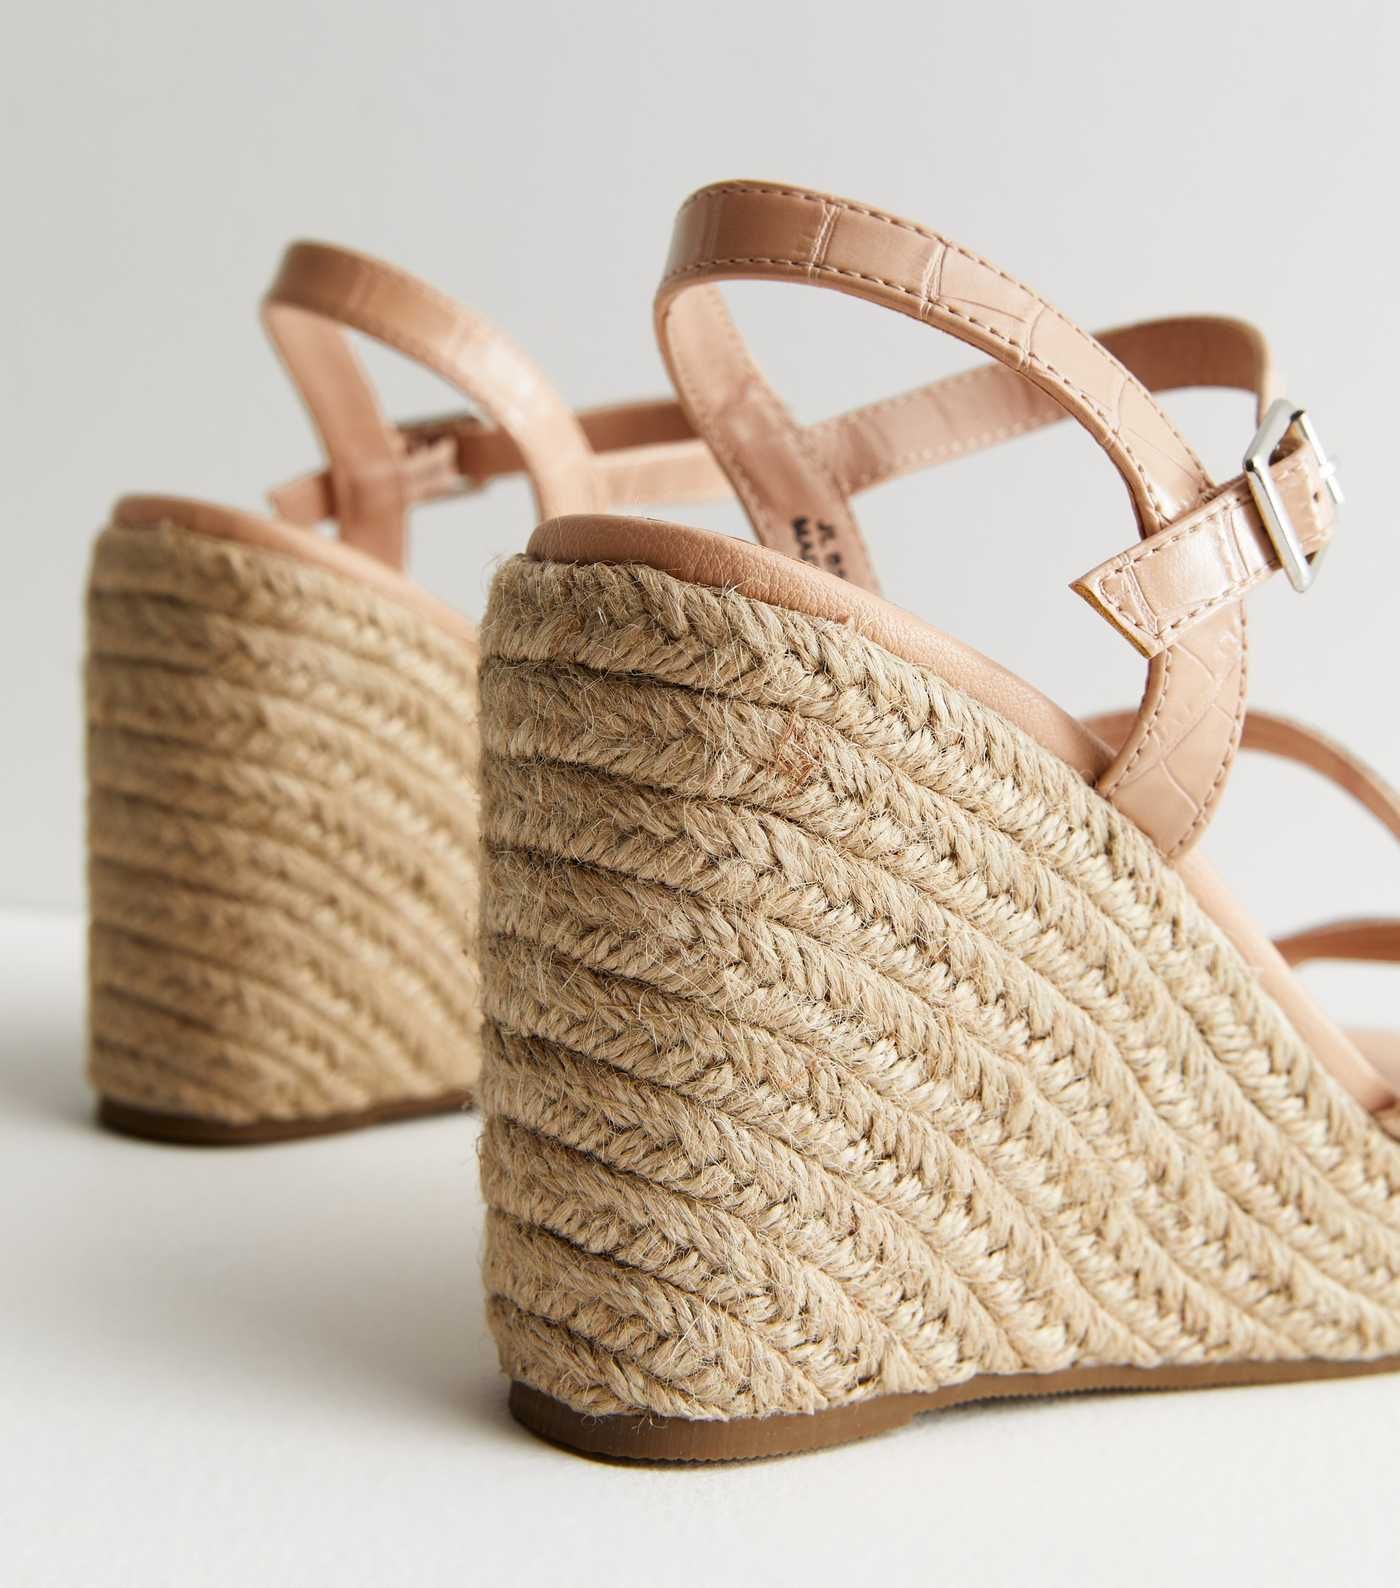 Wide Fit Cream Diamanté Espadrille Wedge Heel Sandals
						
						Add to Saved Items
						Remo... | New Look (UK)